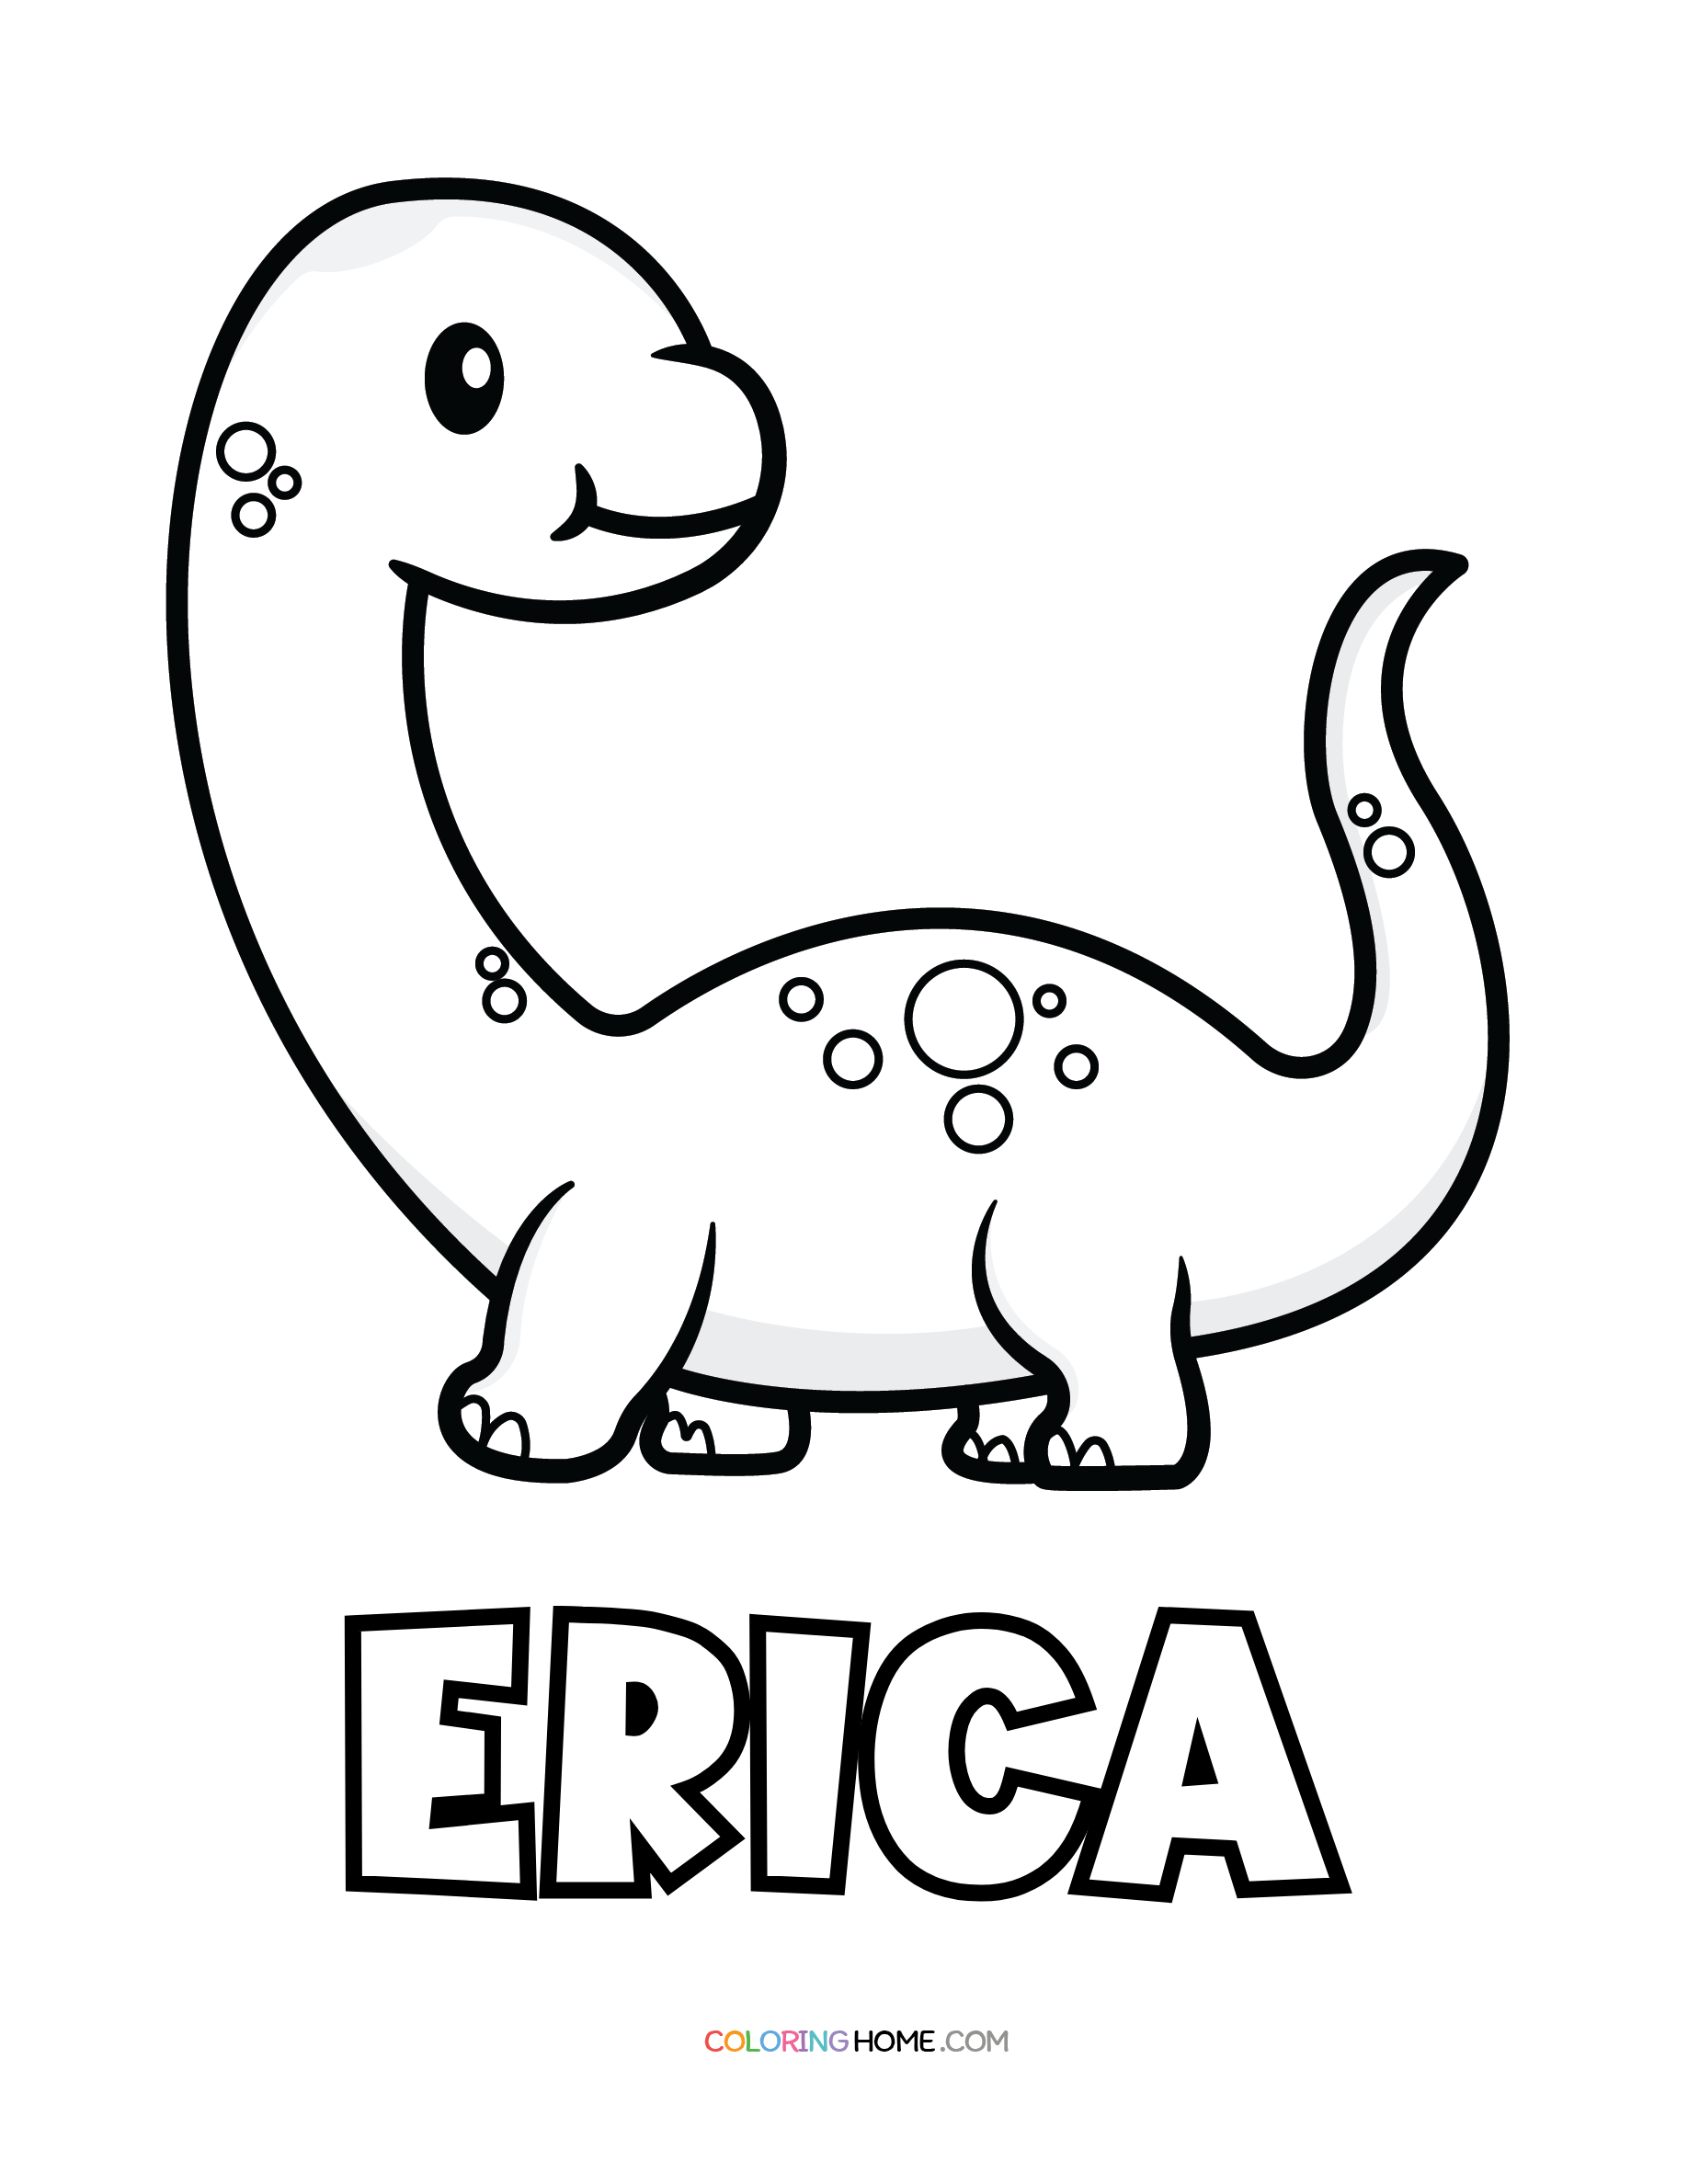 Erica dinosaur coloring page